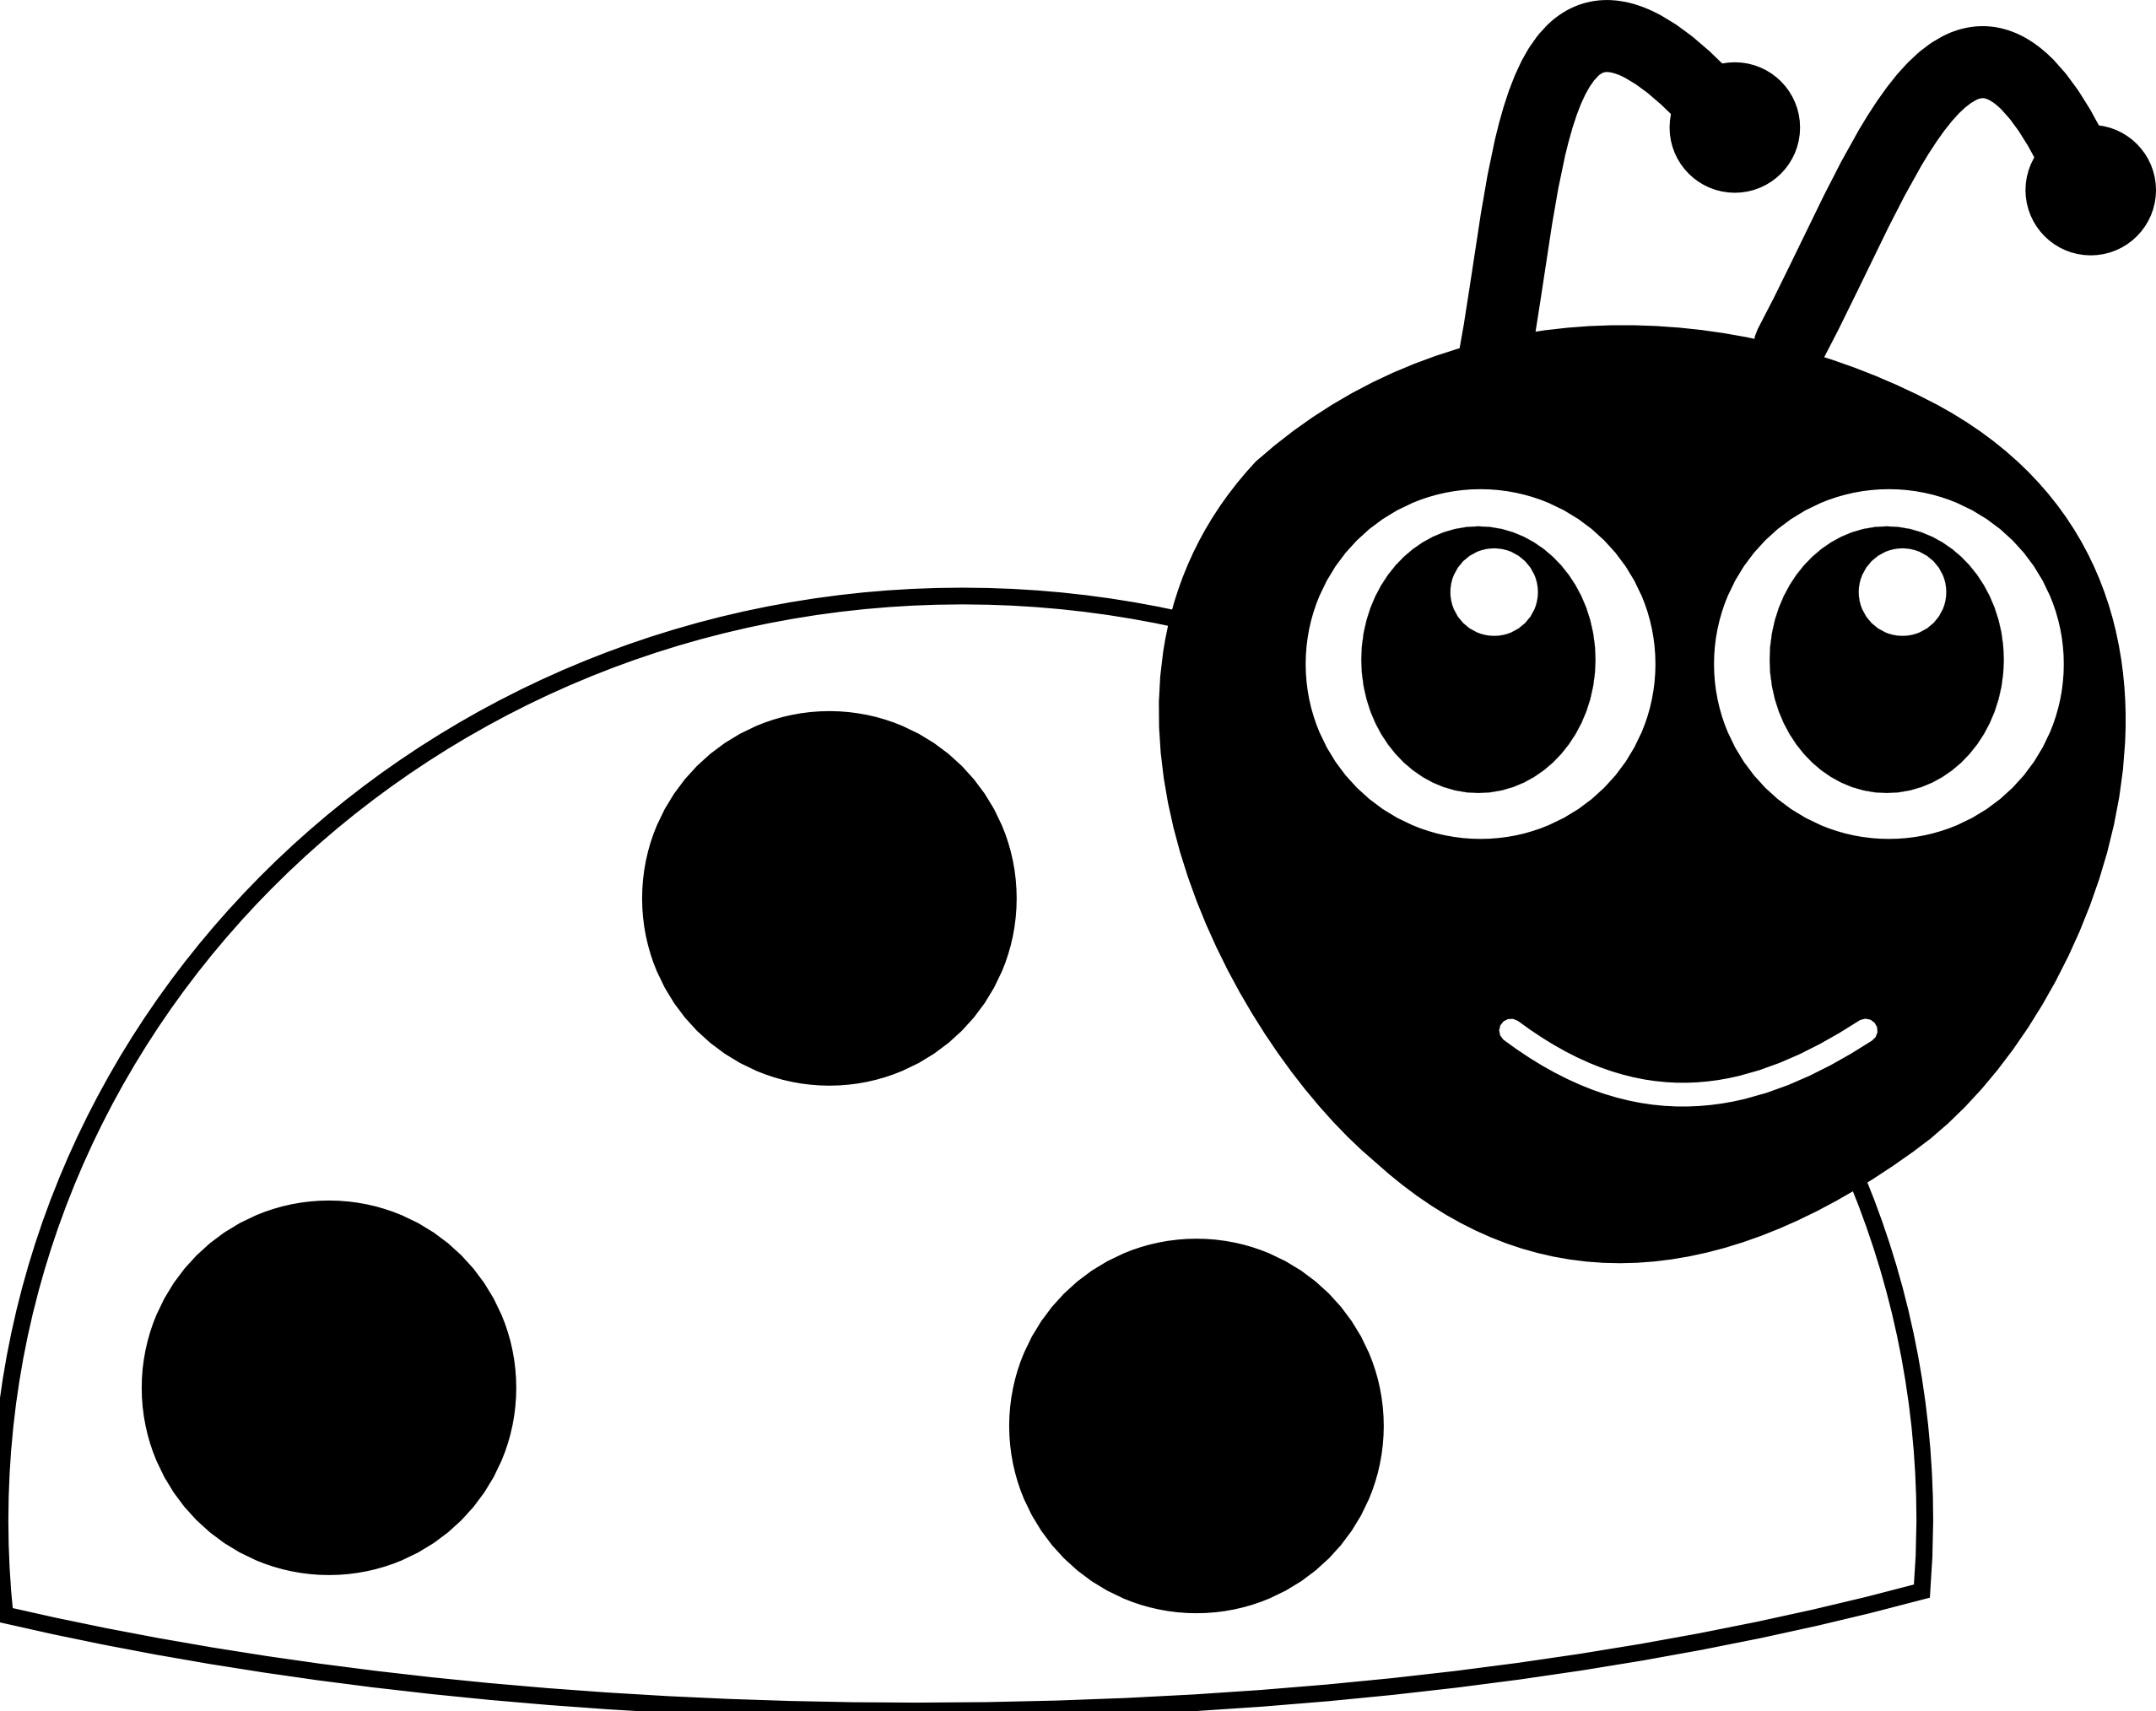 Beetle black and white. Converse clipart sheet